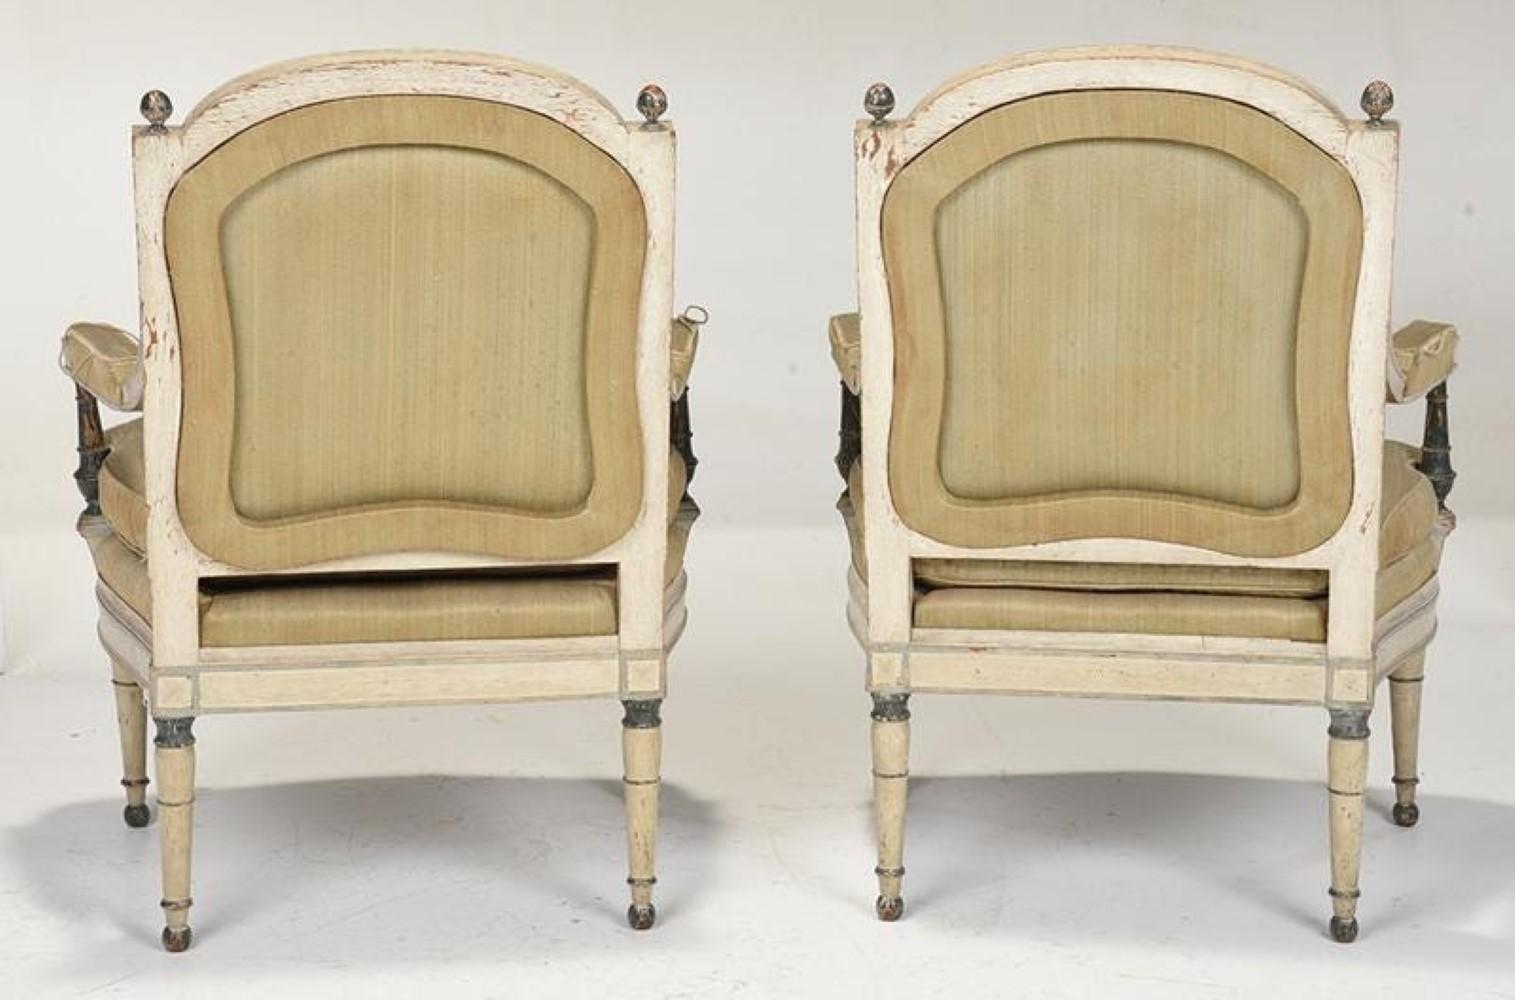 French “Georges Jacob”, Signed Pair Of Directoire Fauteuils, C. 1790